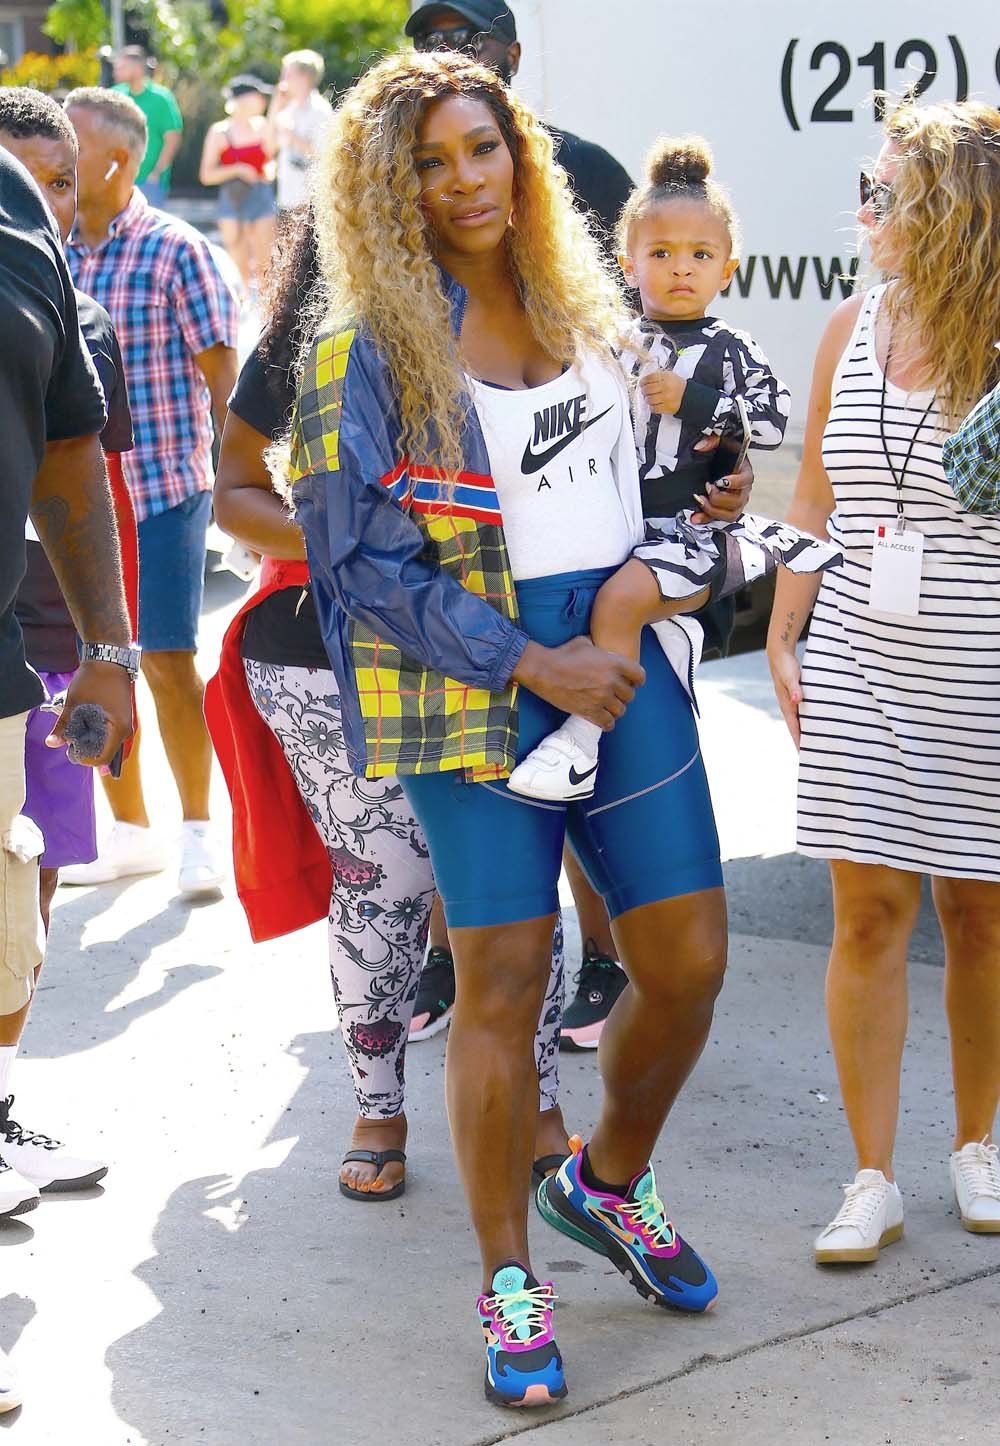 Serena Williams brings her daughter Alexis with her to Nike Event in Soho